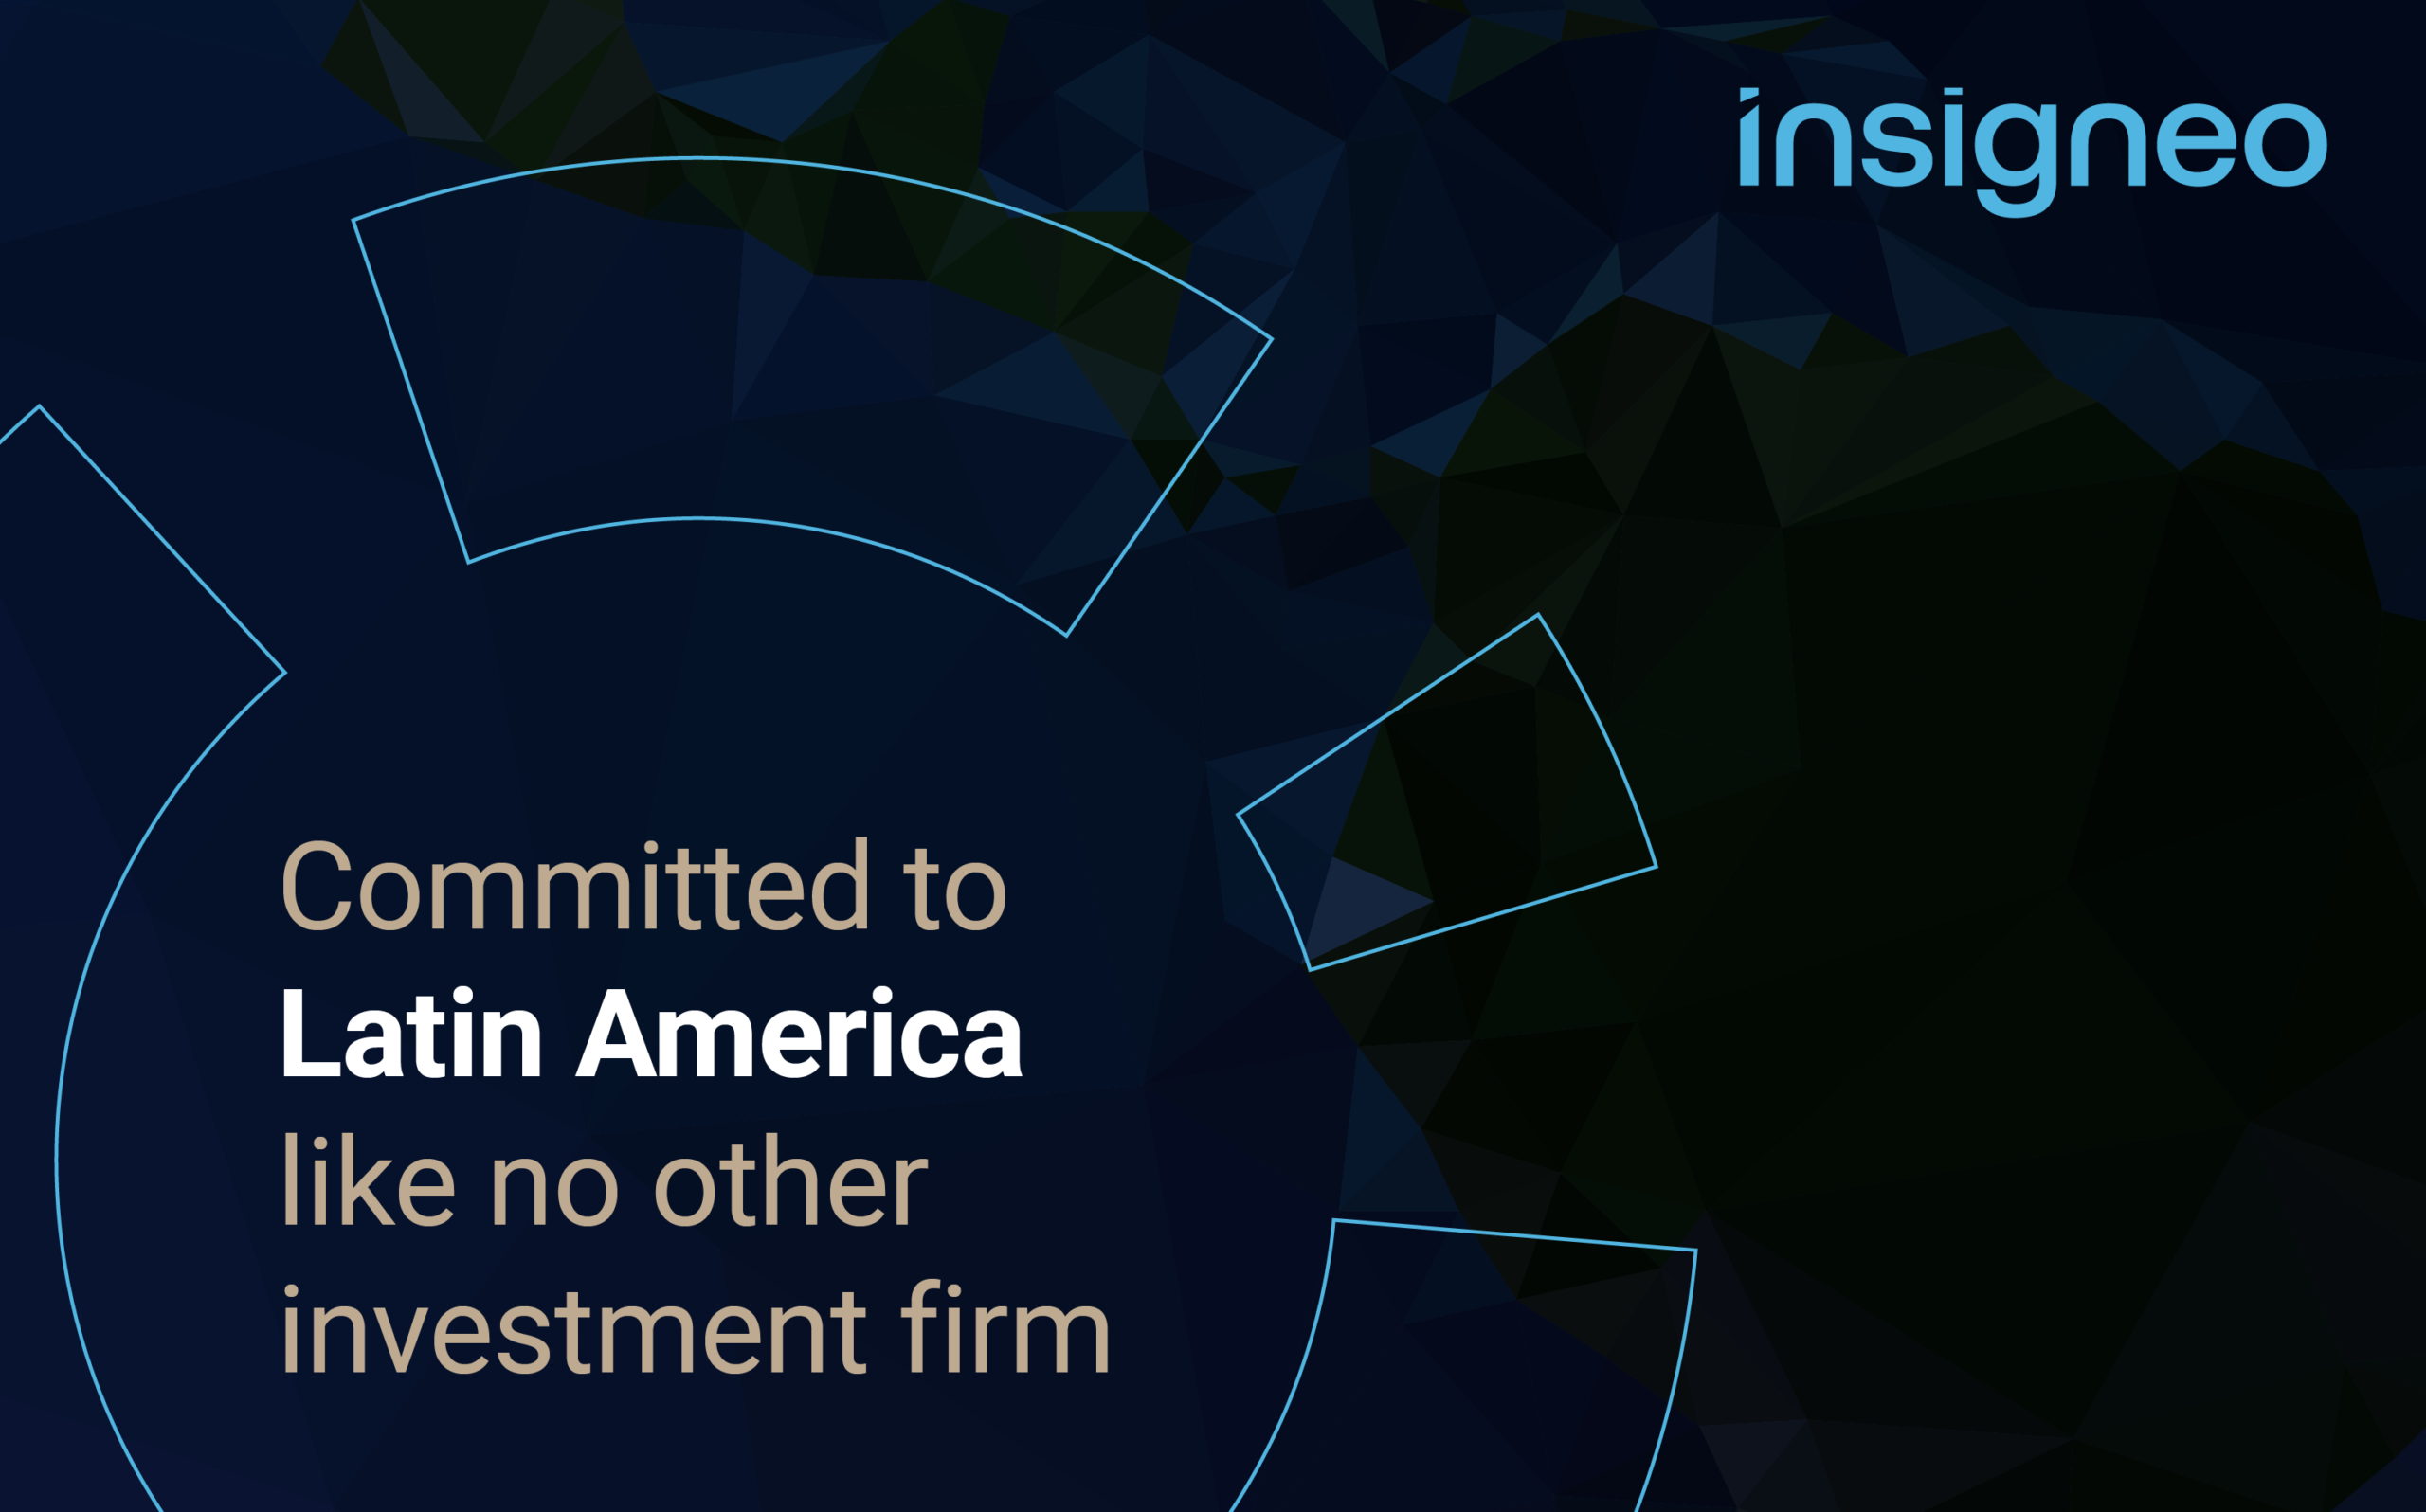 Comminttend with Latin America like no other investment firm - Insigneo Scalto's client